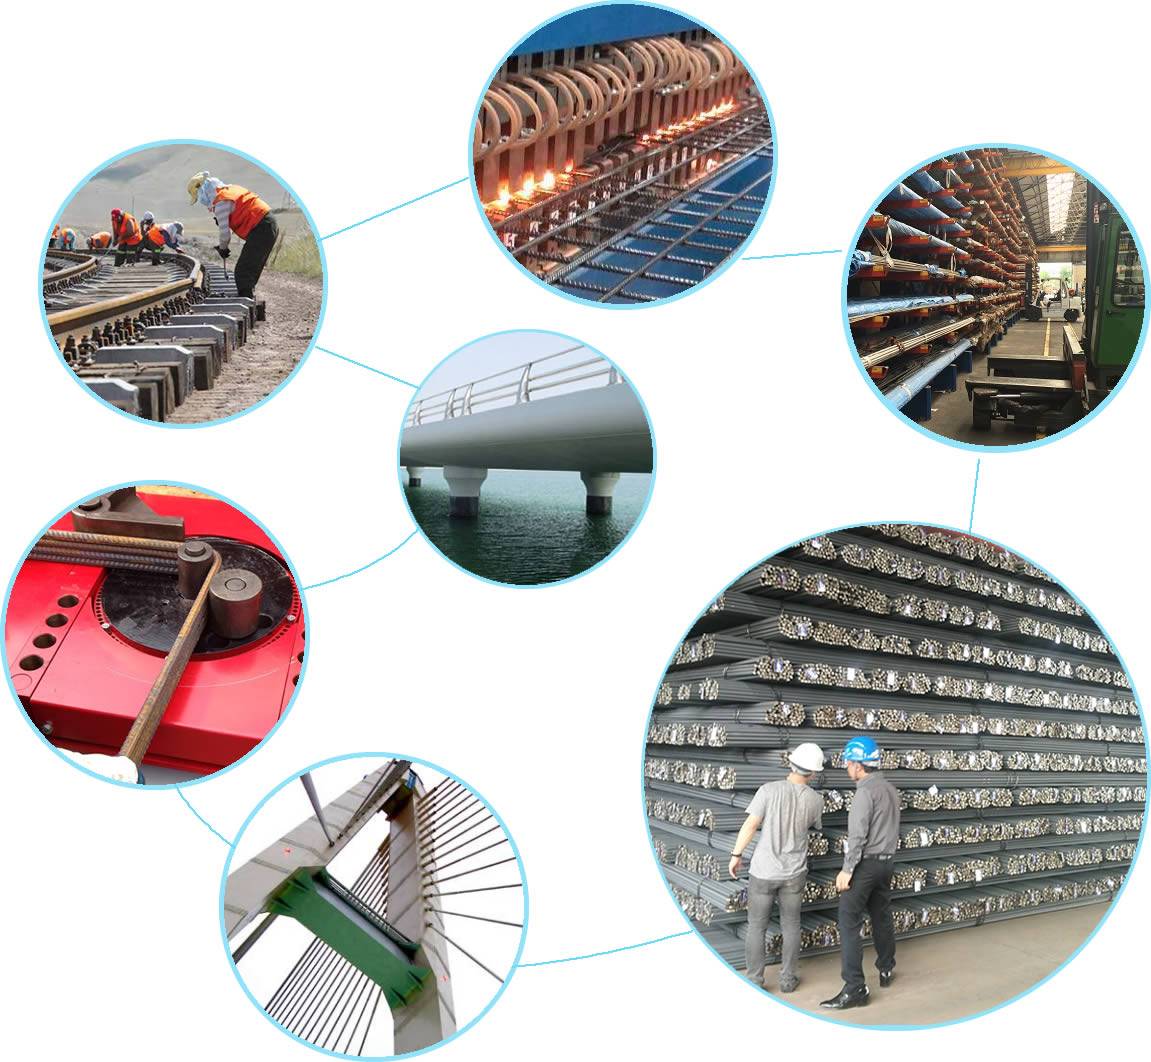 A picture shows our reinforcing bars in warehouse, rebar bending, and rebar used in railway and bridge construction.